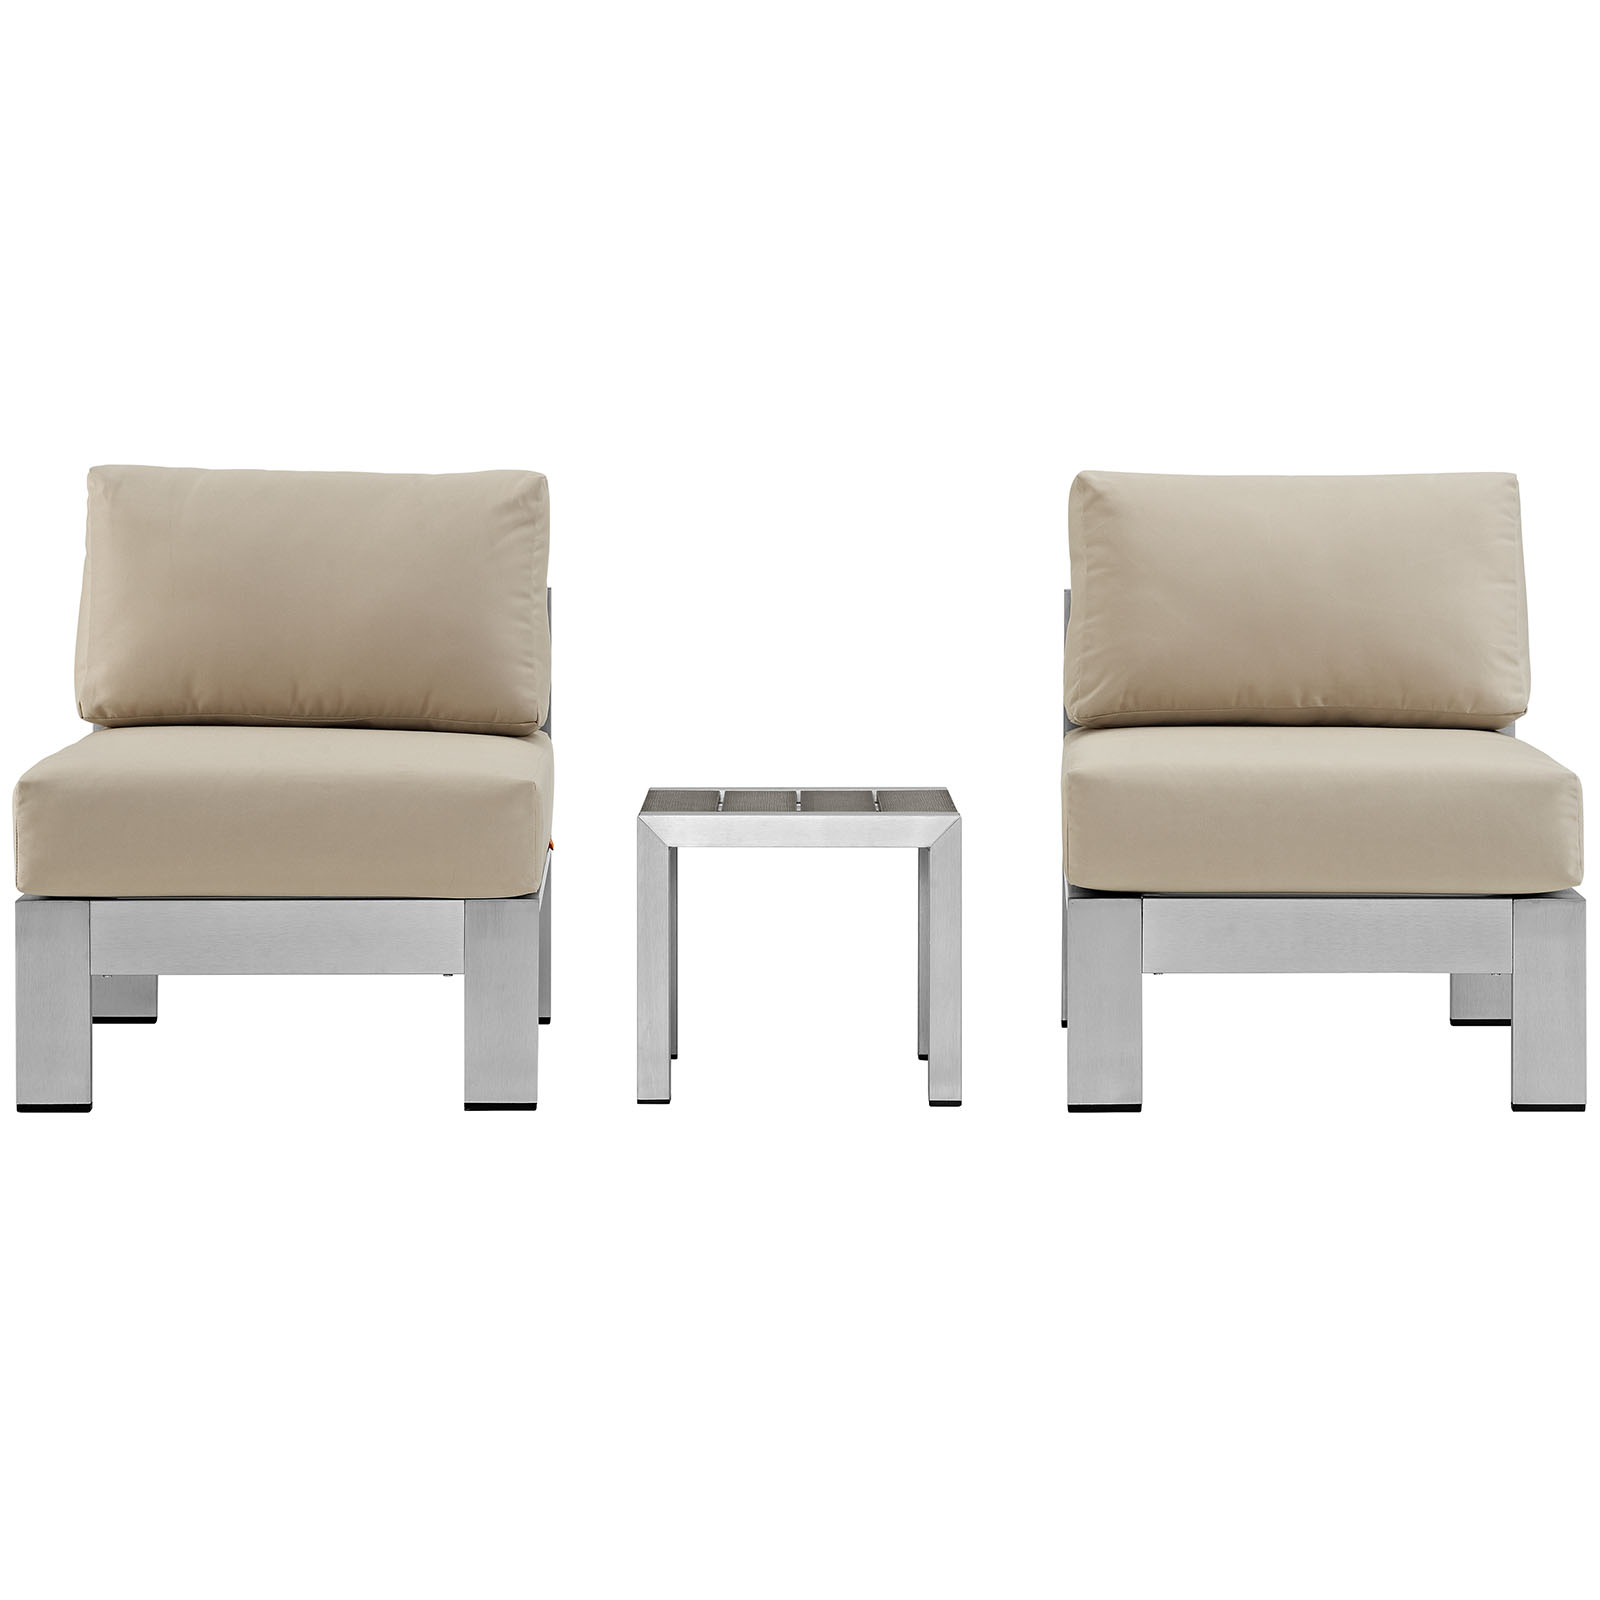 Modway Shore 3 Piece Outdoor Patio Aluminum Sectional Sofa Set in Silver Beige - image 2 of 6